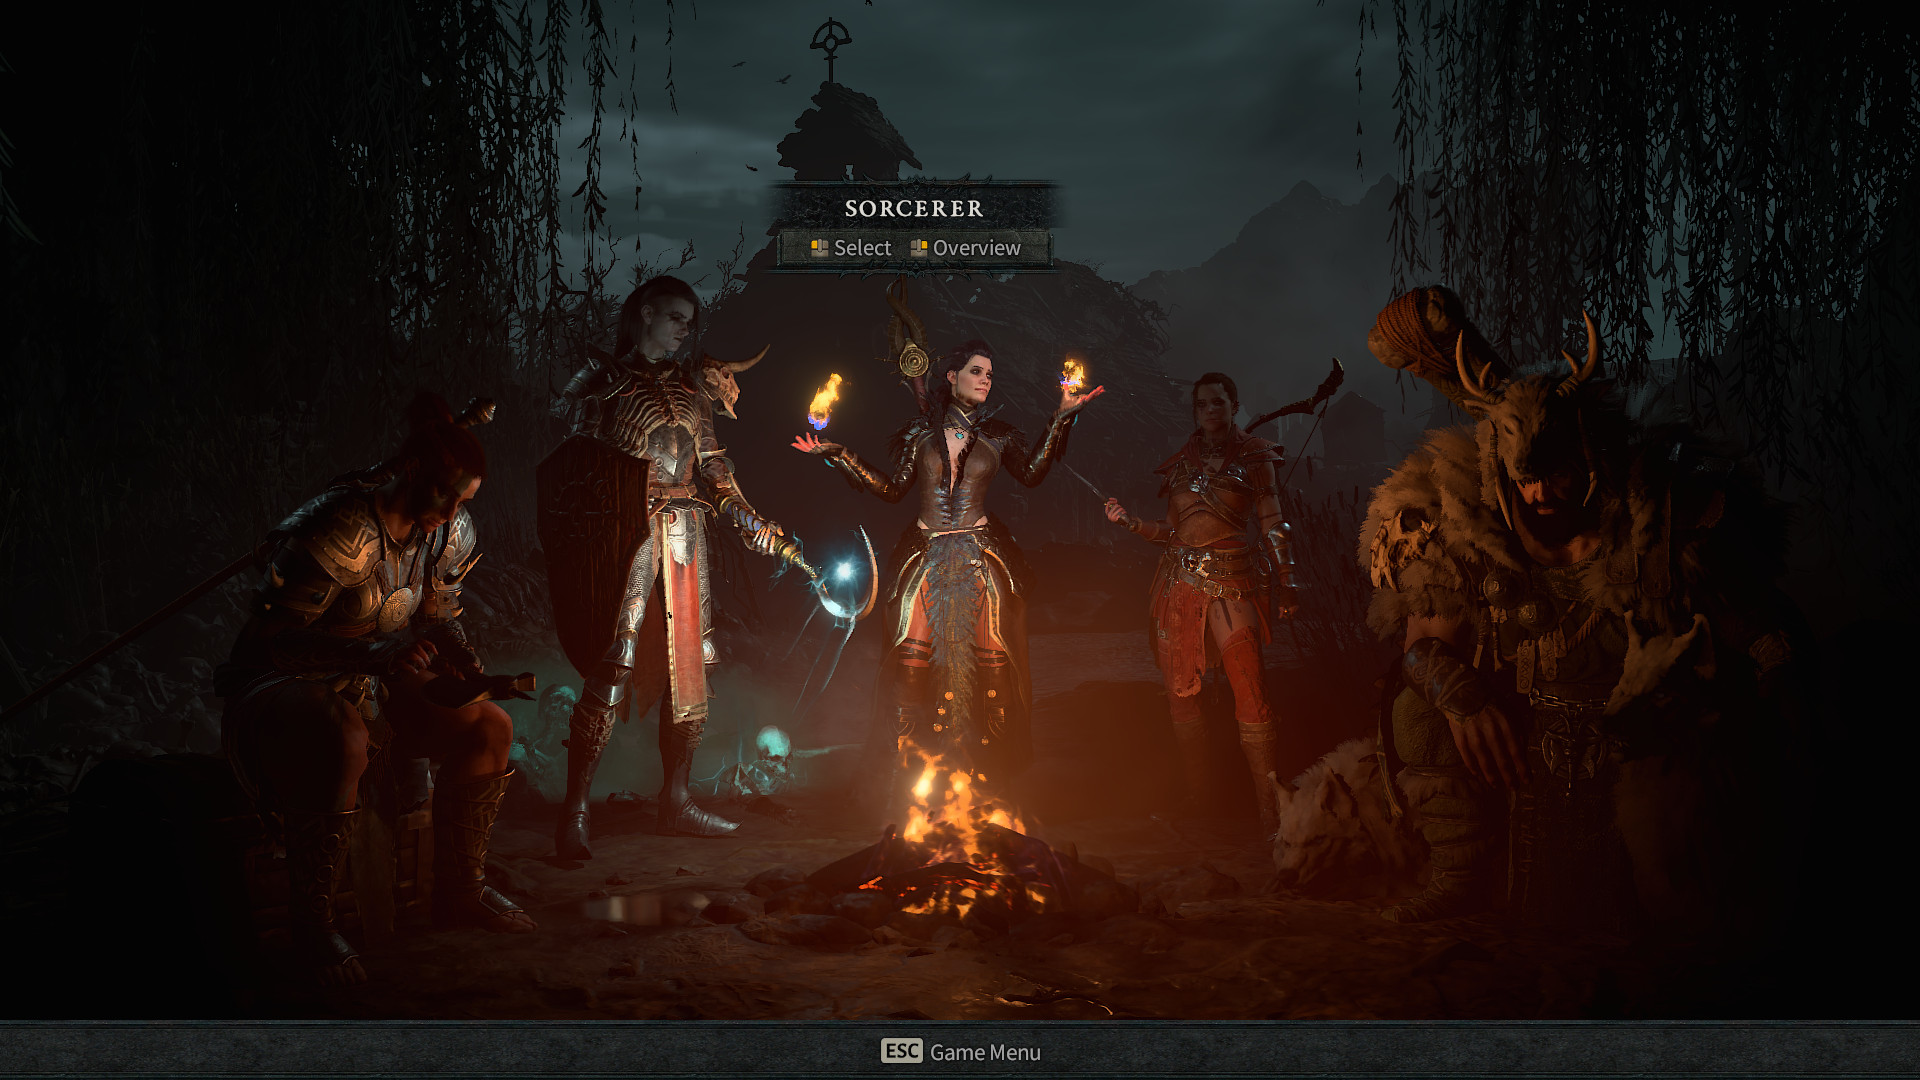 Take a tour of the Diablo 4 beta character creation options